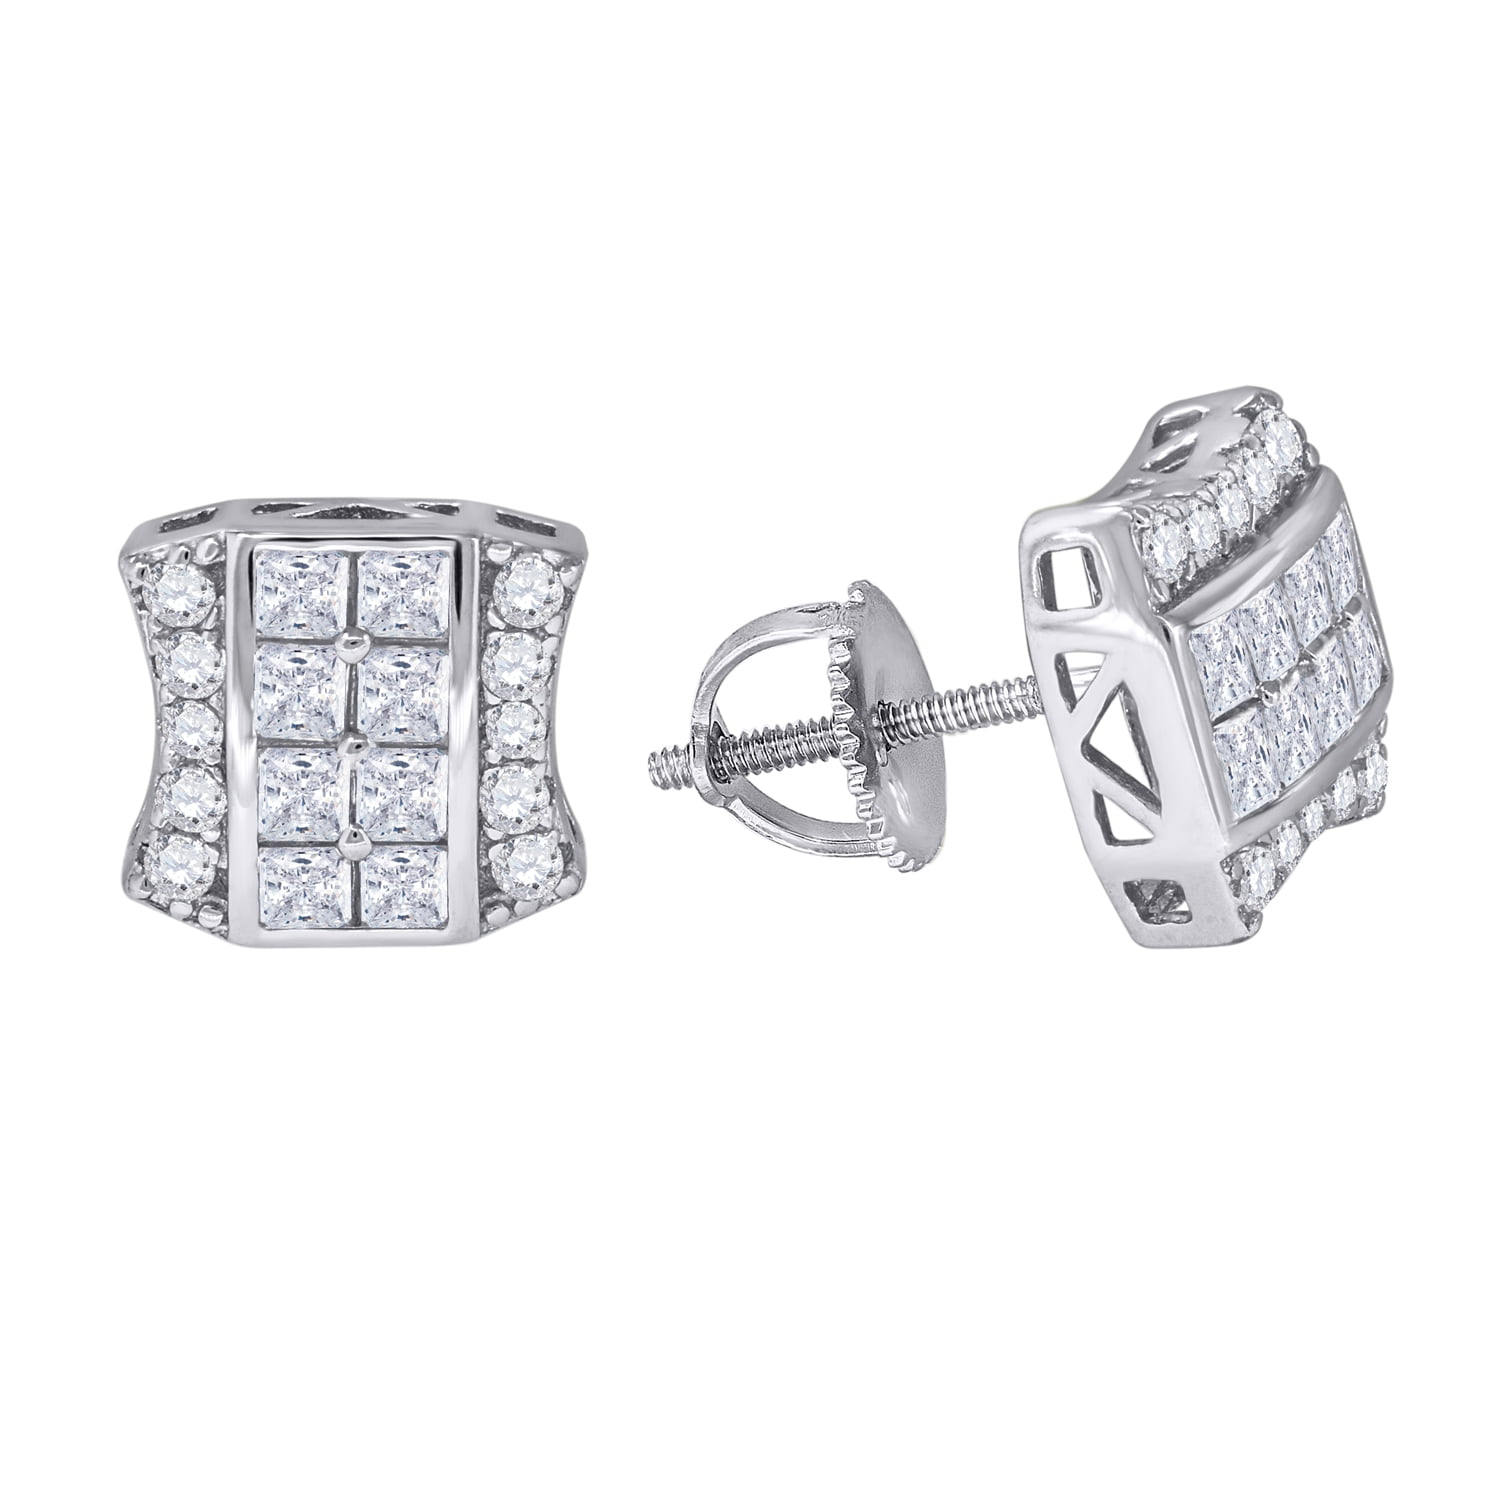 FB Jewels Solid 925 Sterling Silver Round Cubic Zirconia CZ Stud Earrings